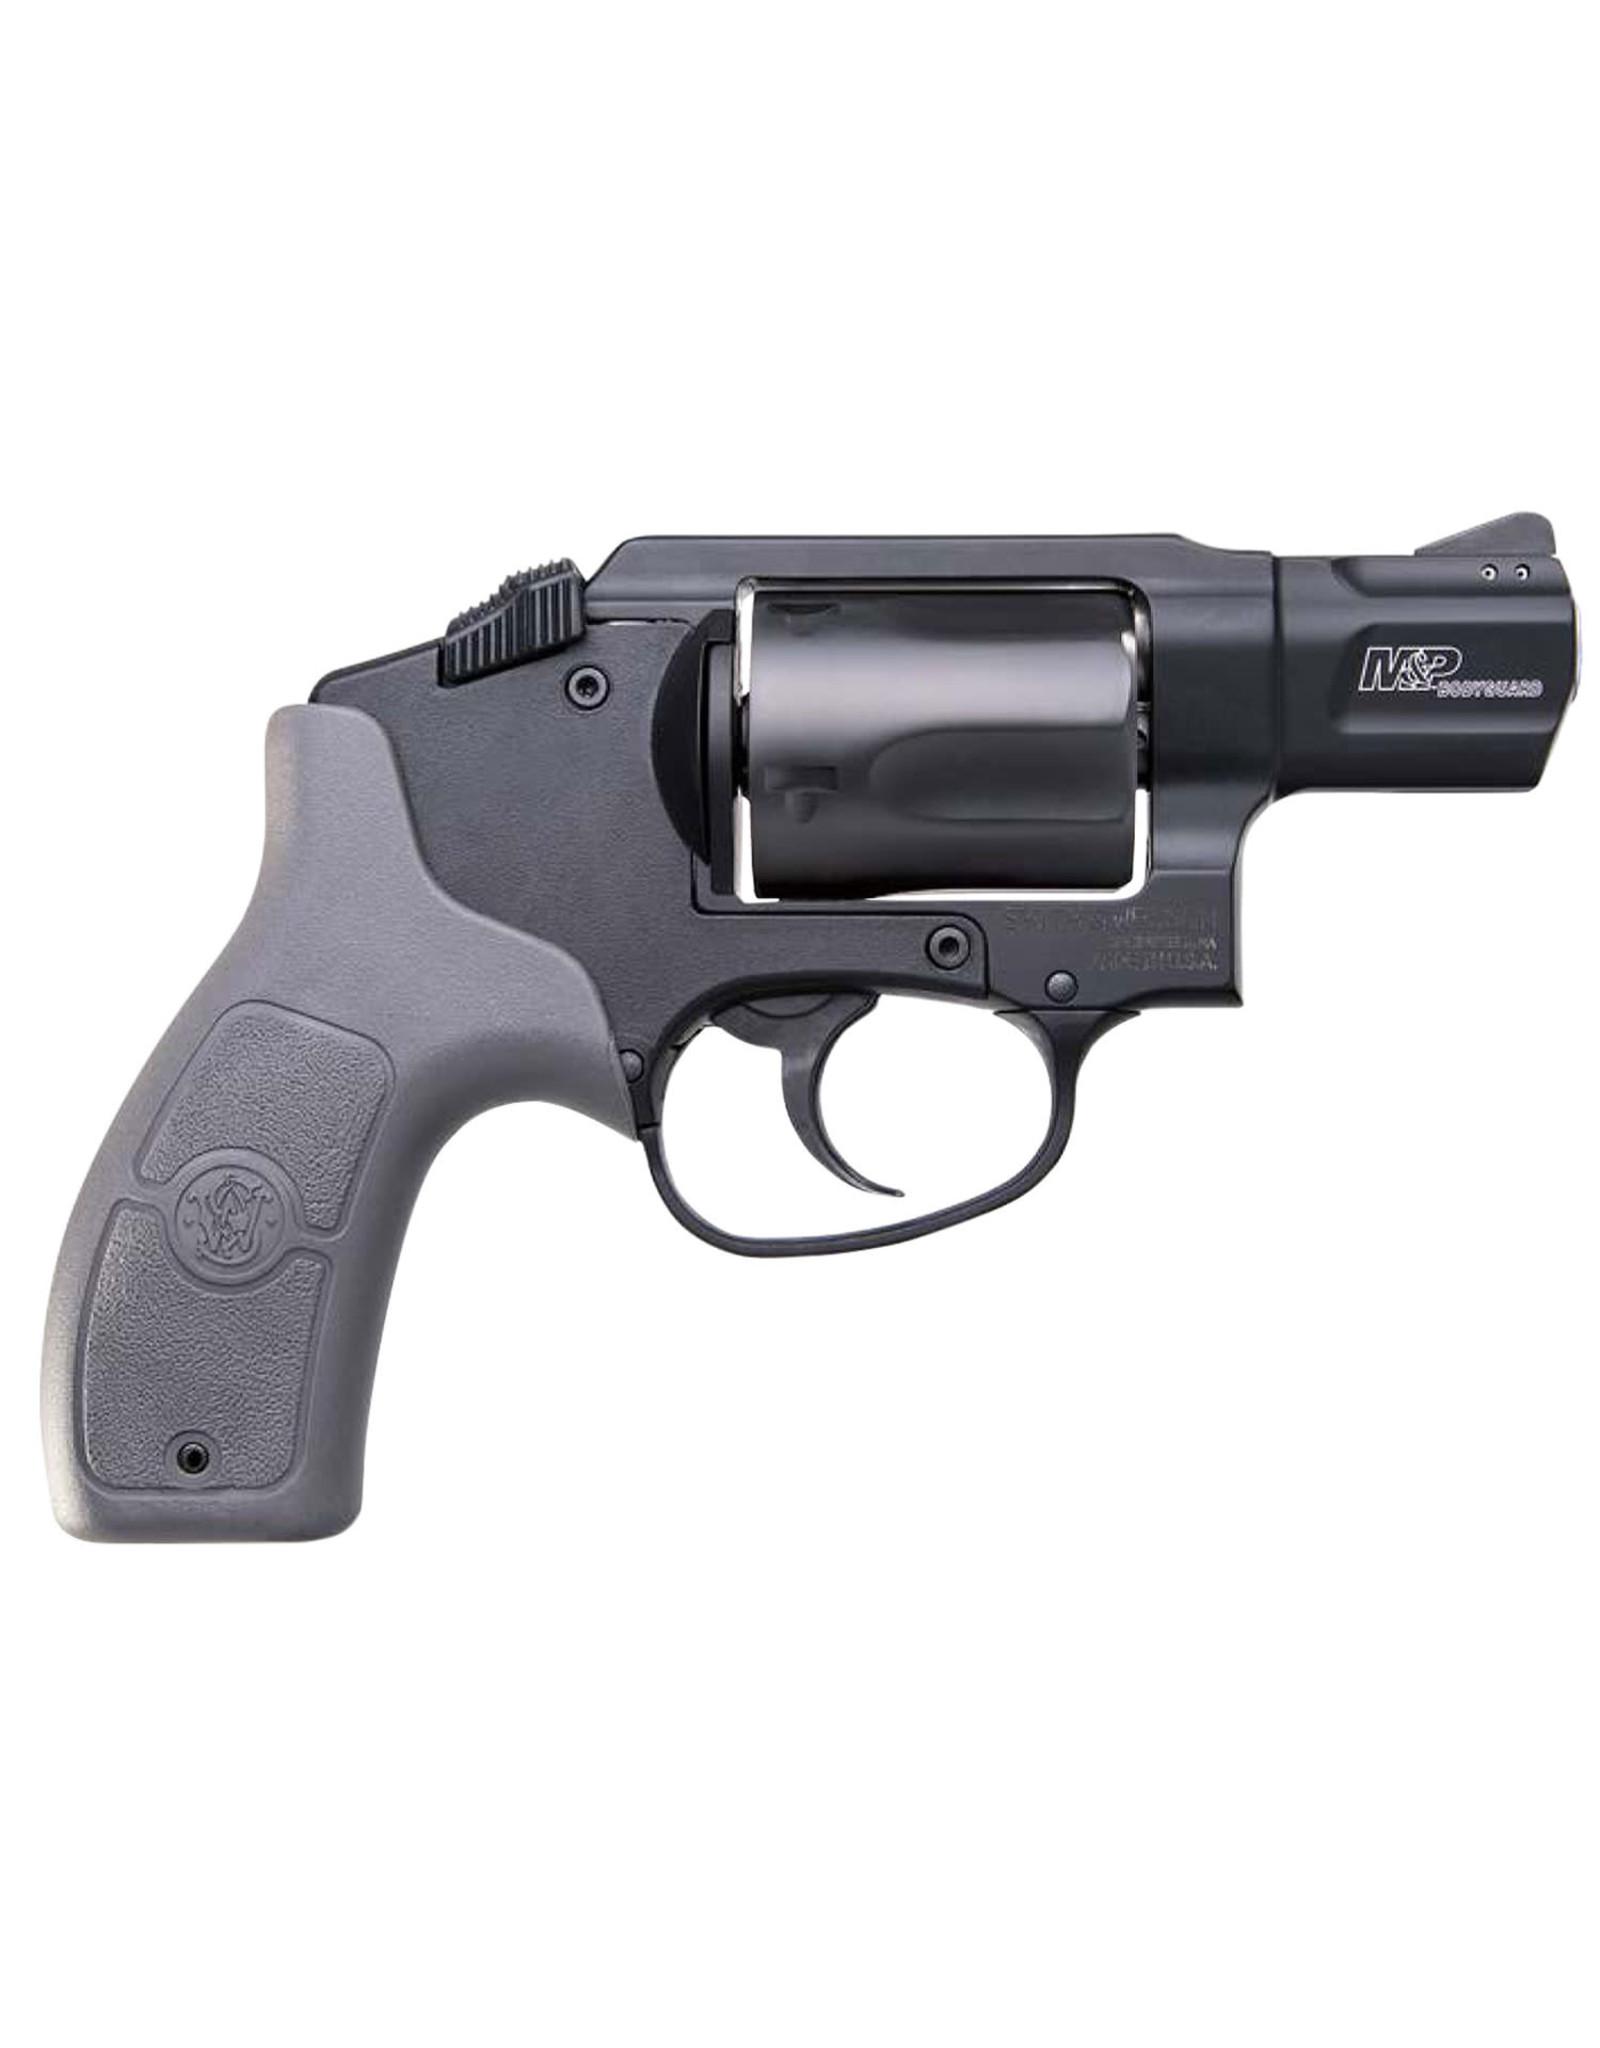 SMITH & WESSON Smith & Wesson M&P Bodyguard 38 Special +P 1.875" 5 rd